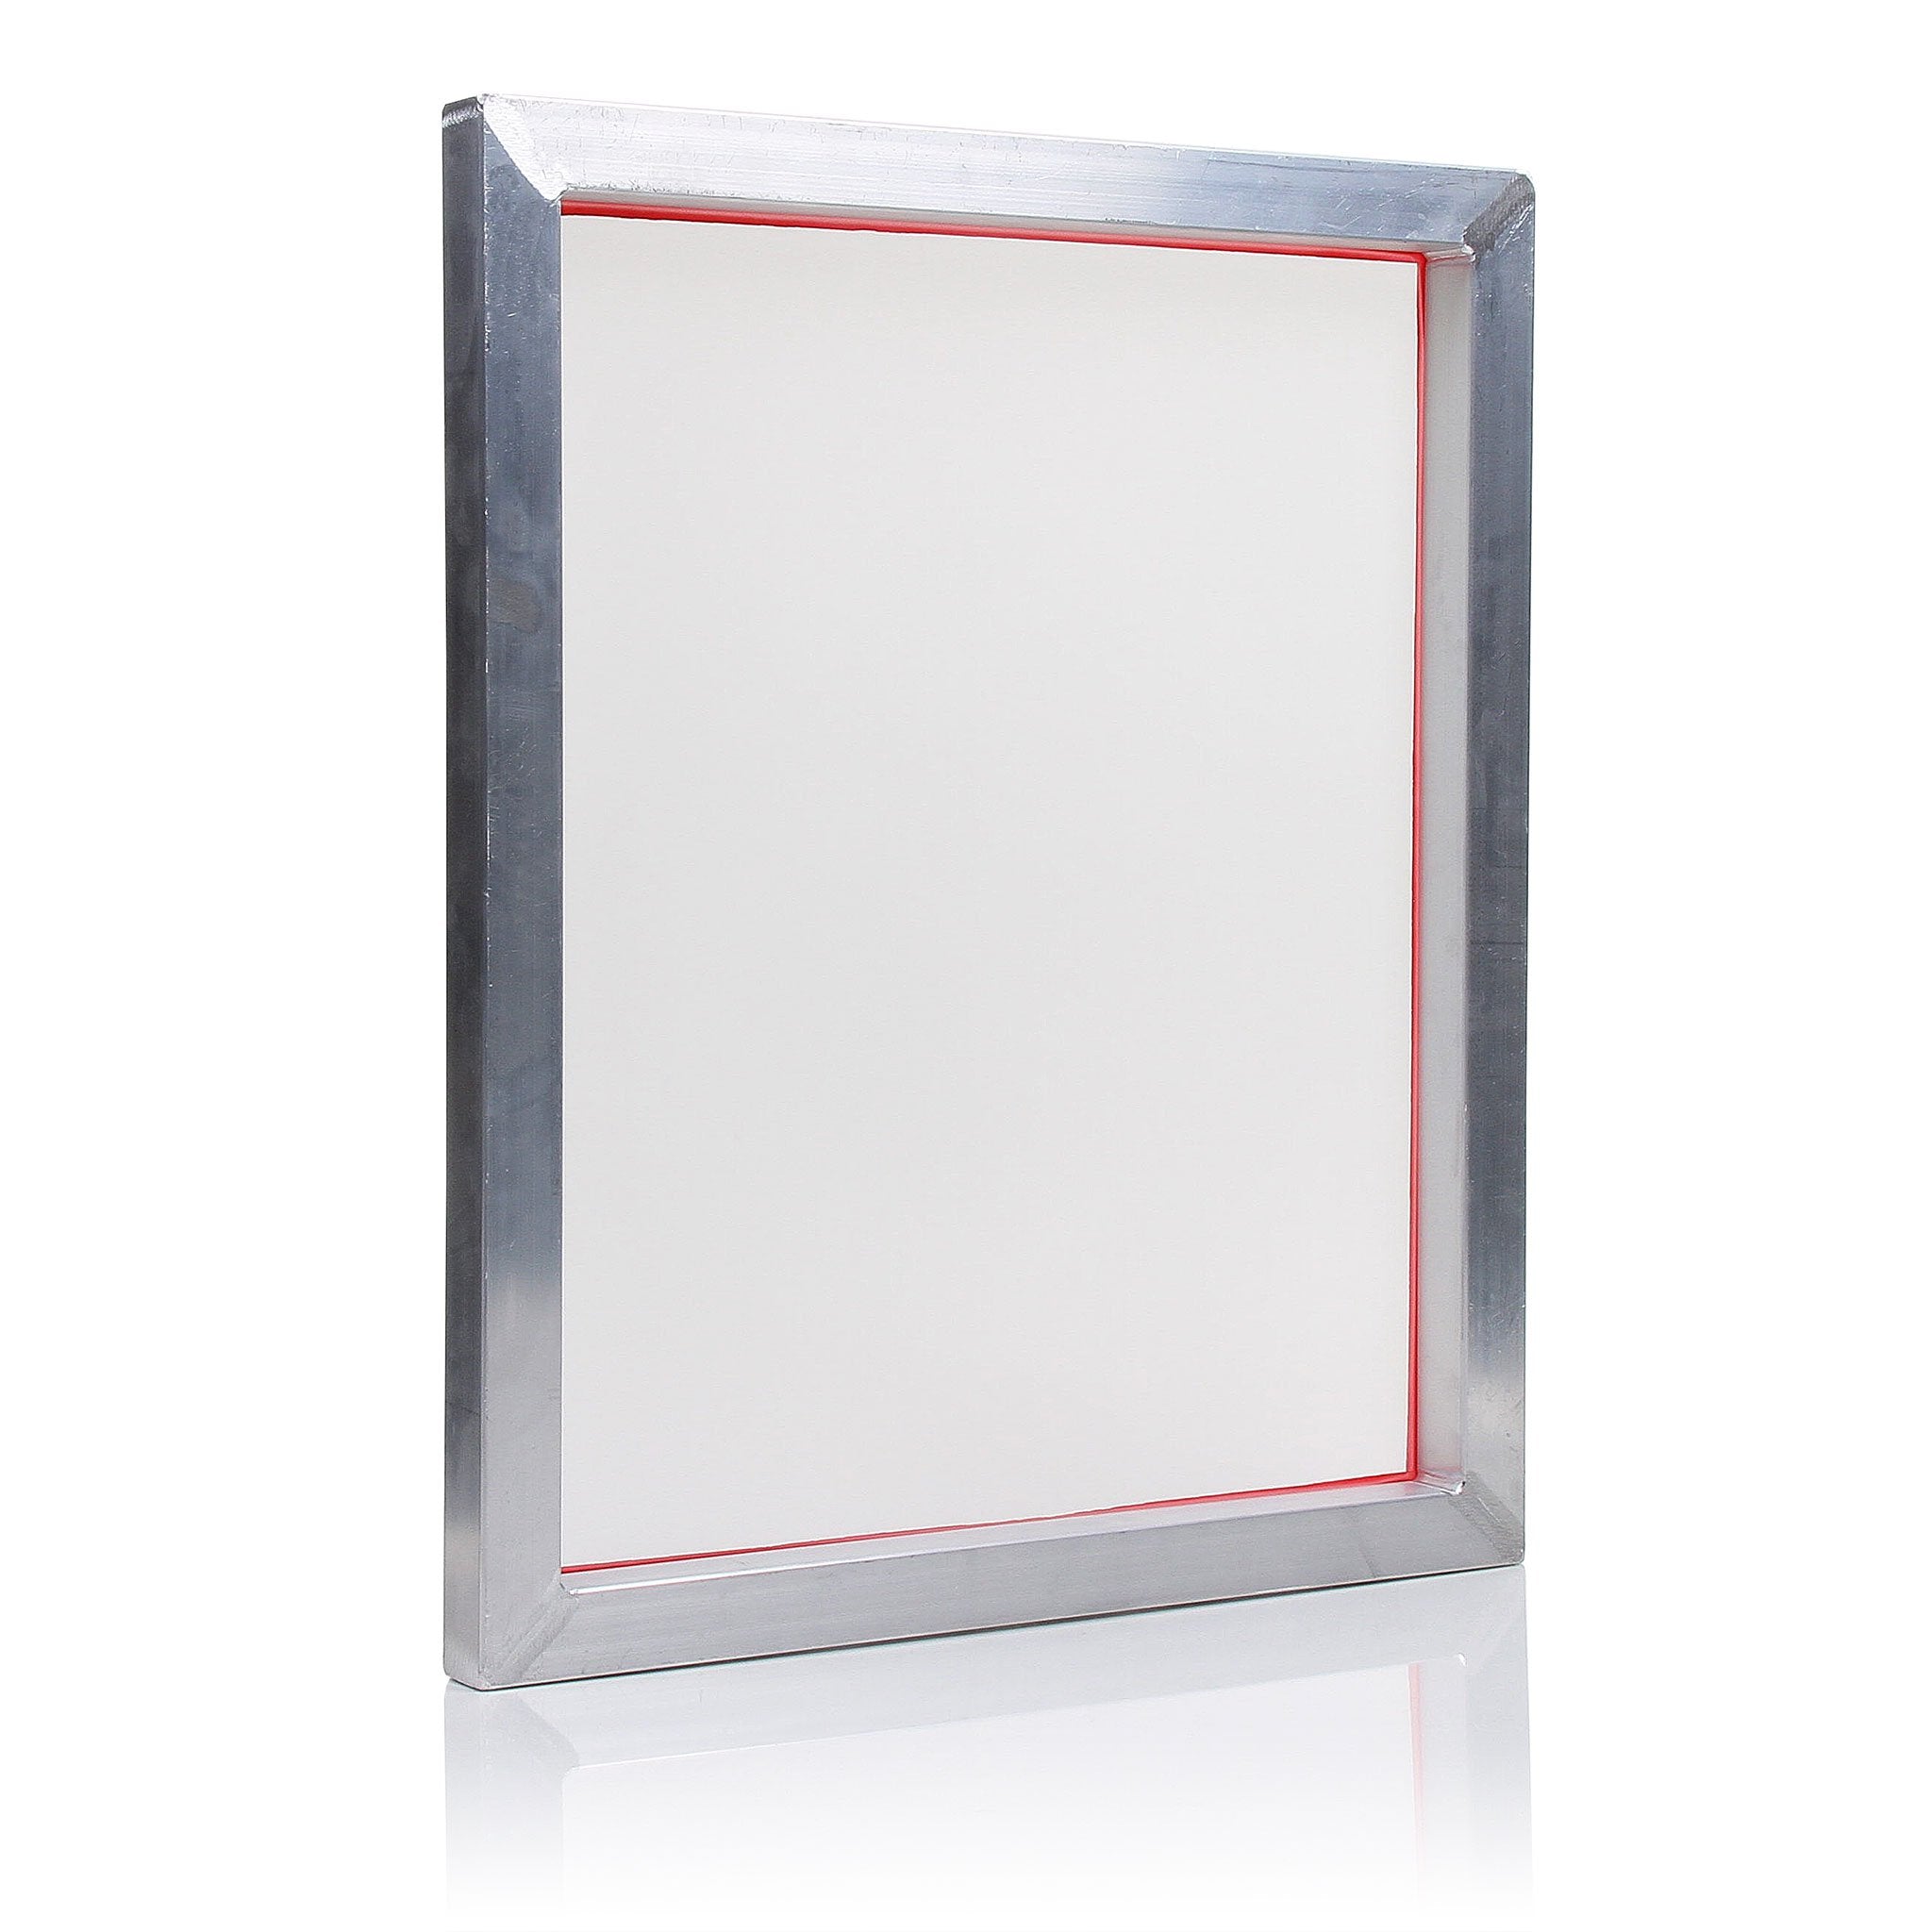 20 x 24 Inch Pre-stretched Aluminum Silk Screen Printing Frames with 180 White Mesh 6 Pack Screens